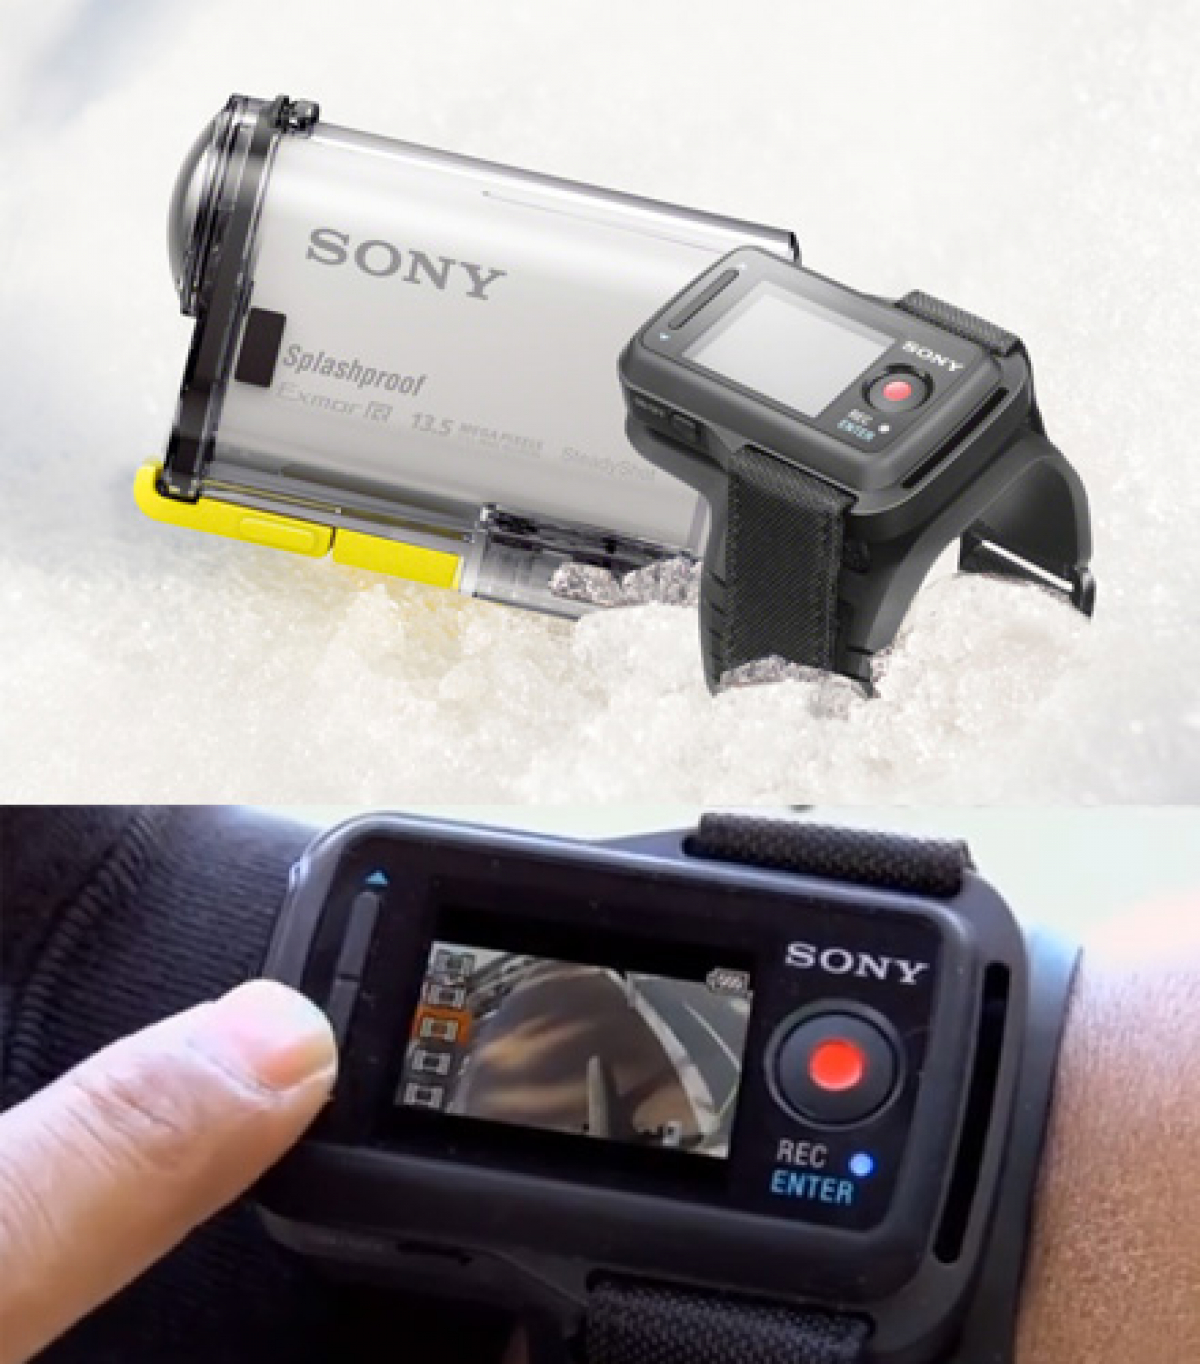 Sony Action Cam - HDR-AS100V